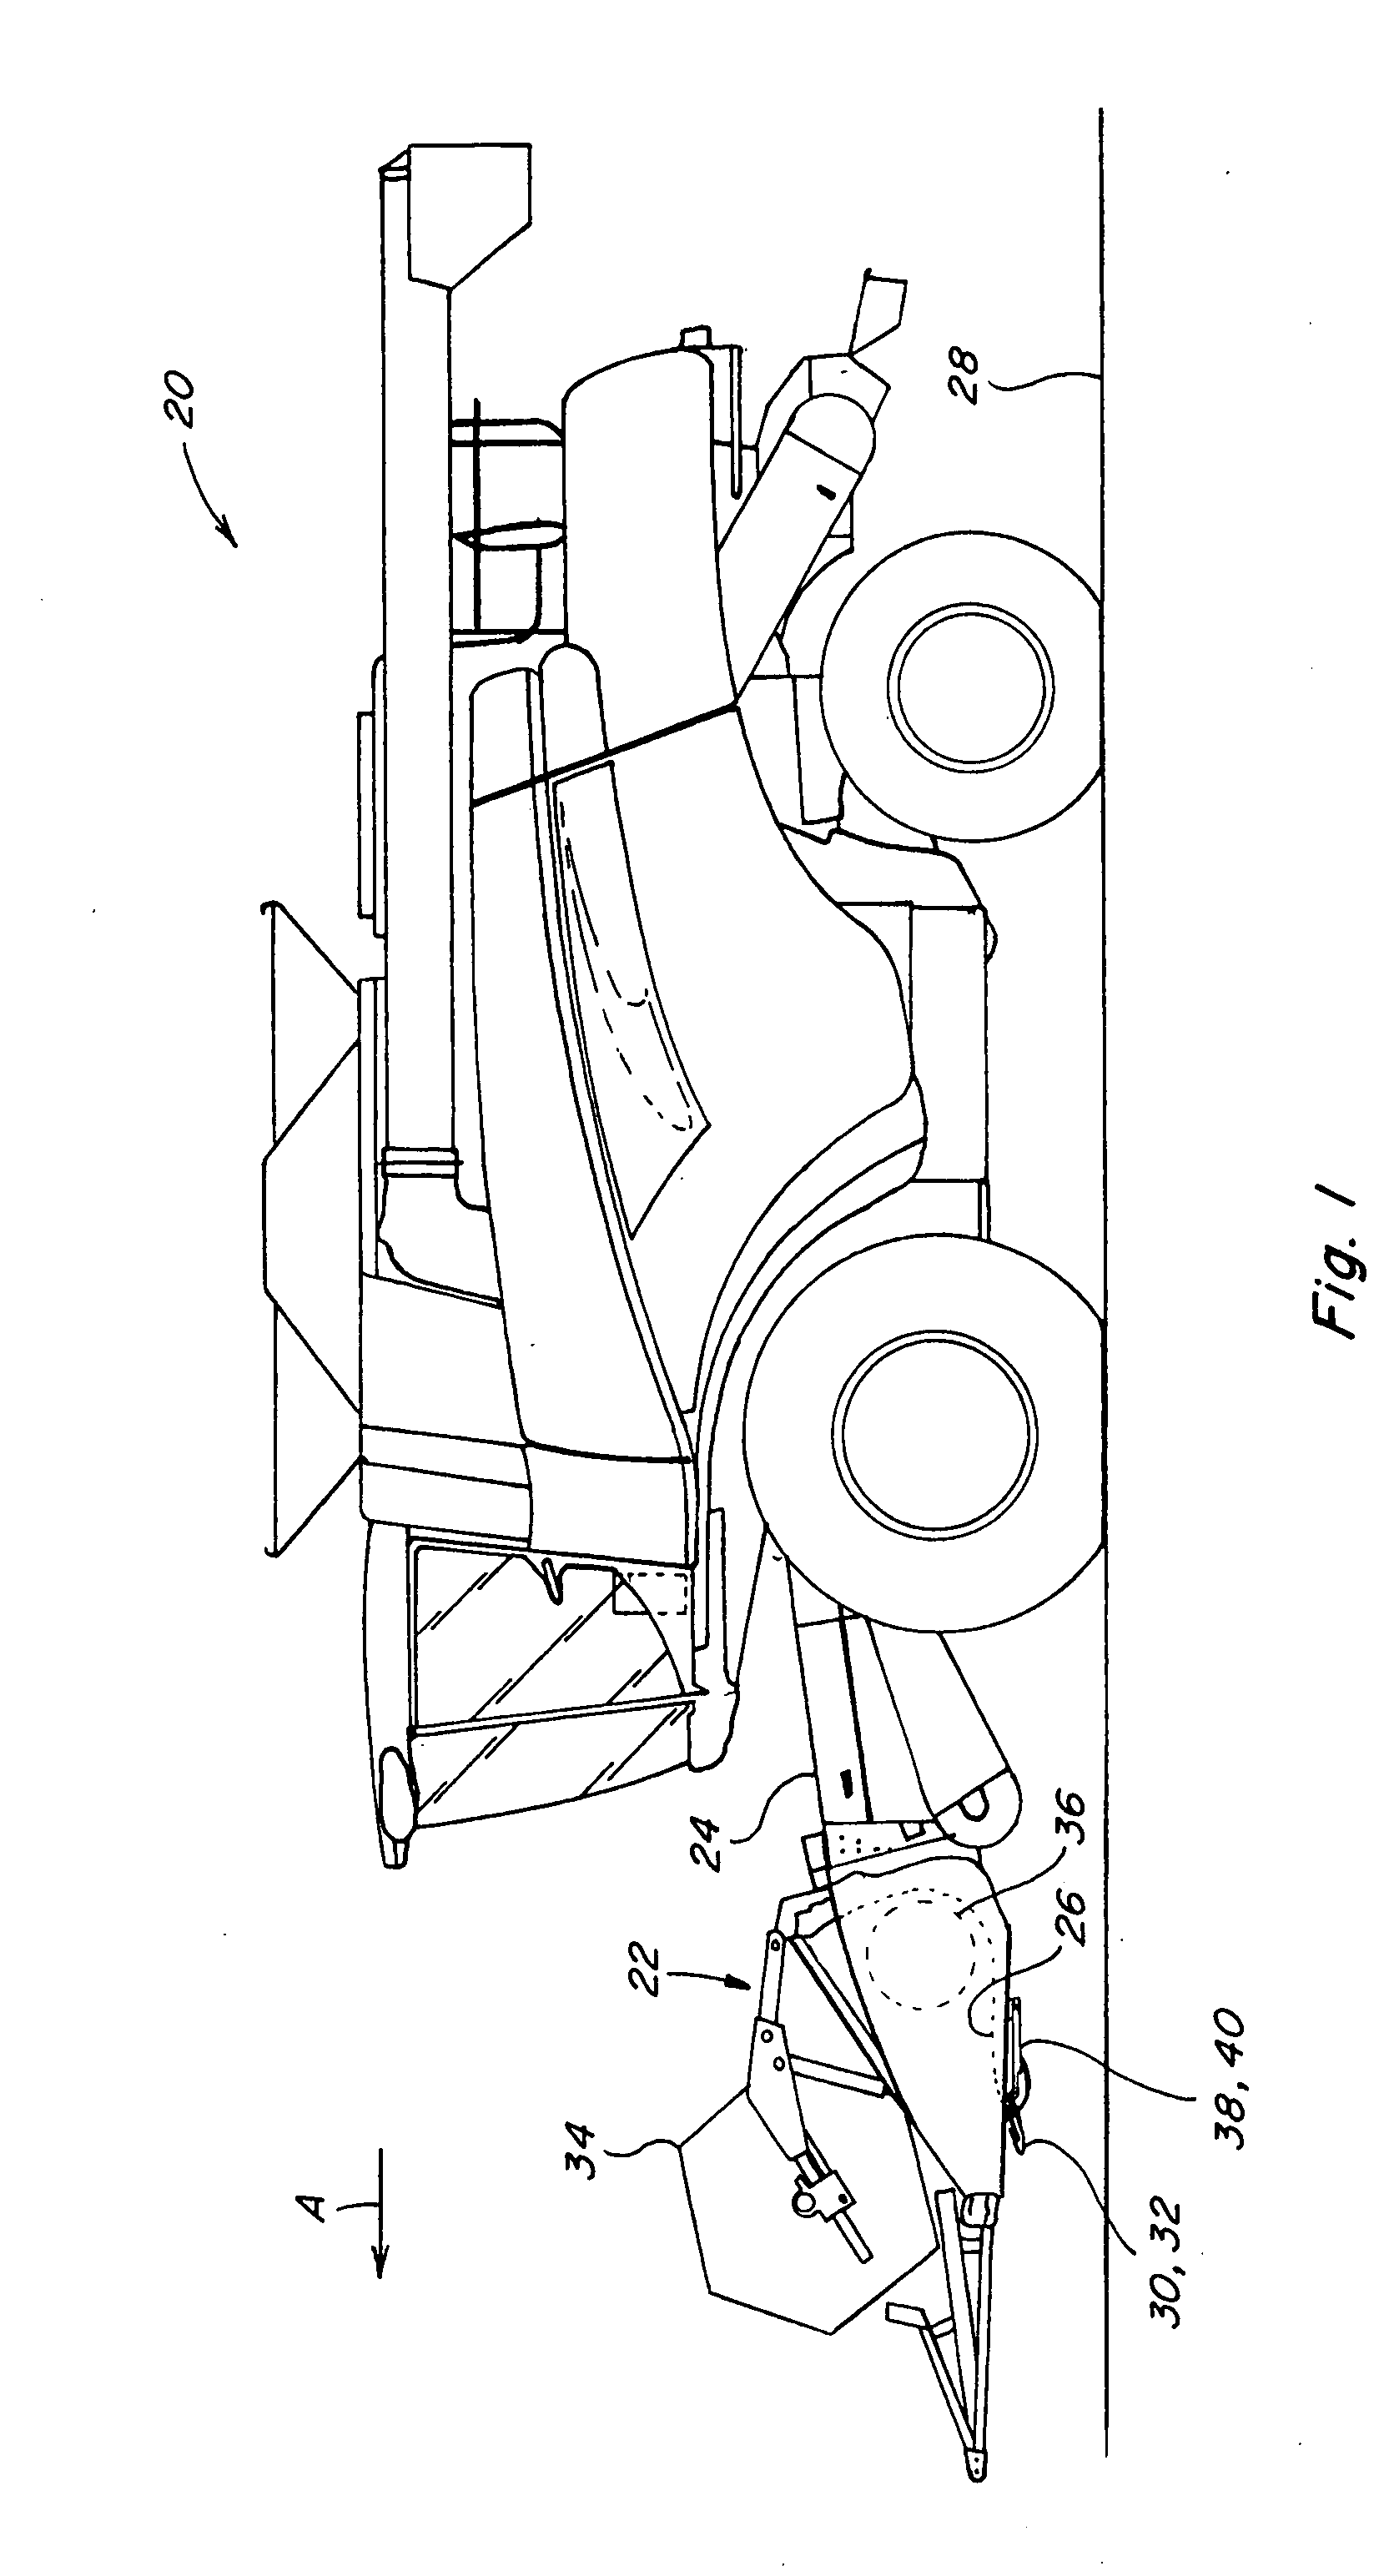 Automatic control system for a header of an agricultural harvesting machine and method of operation of the same